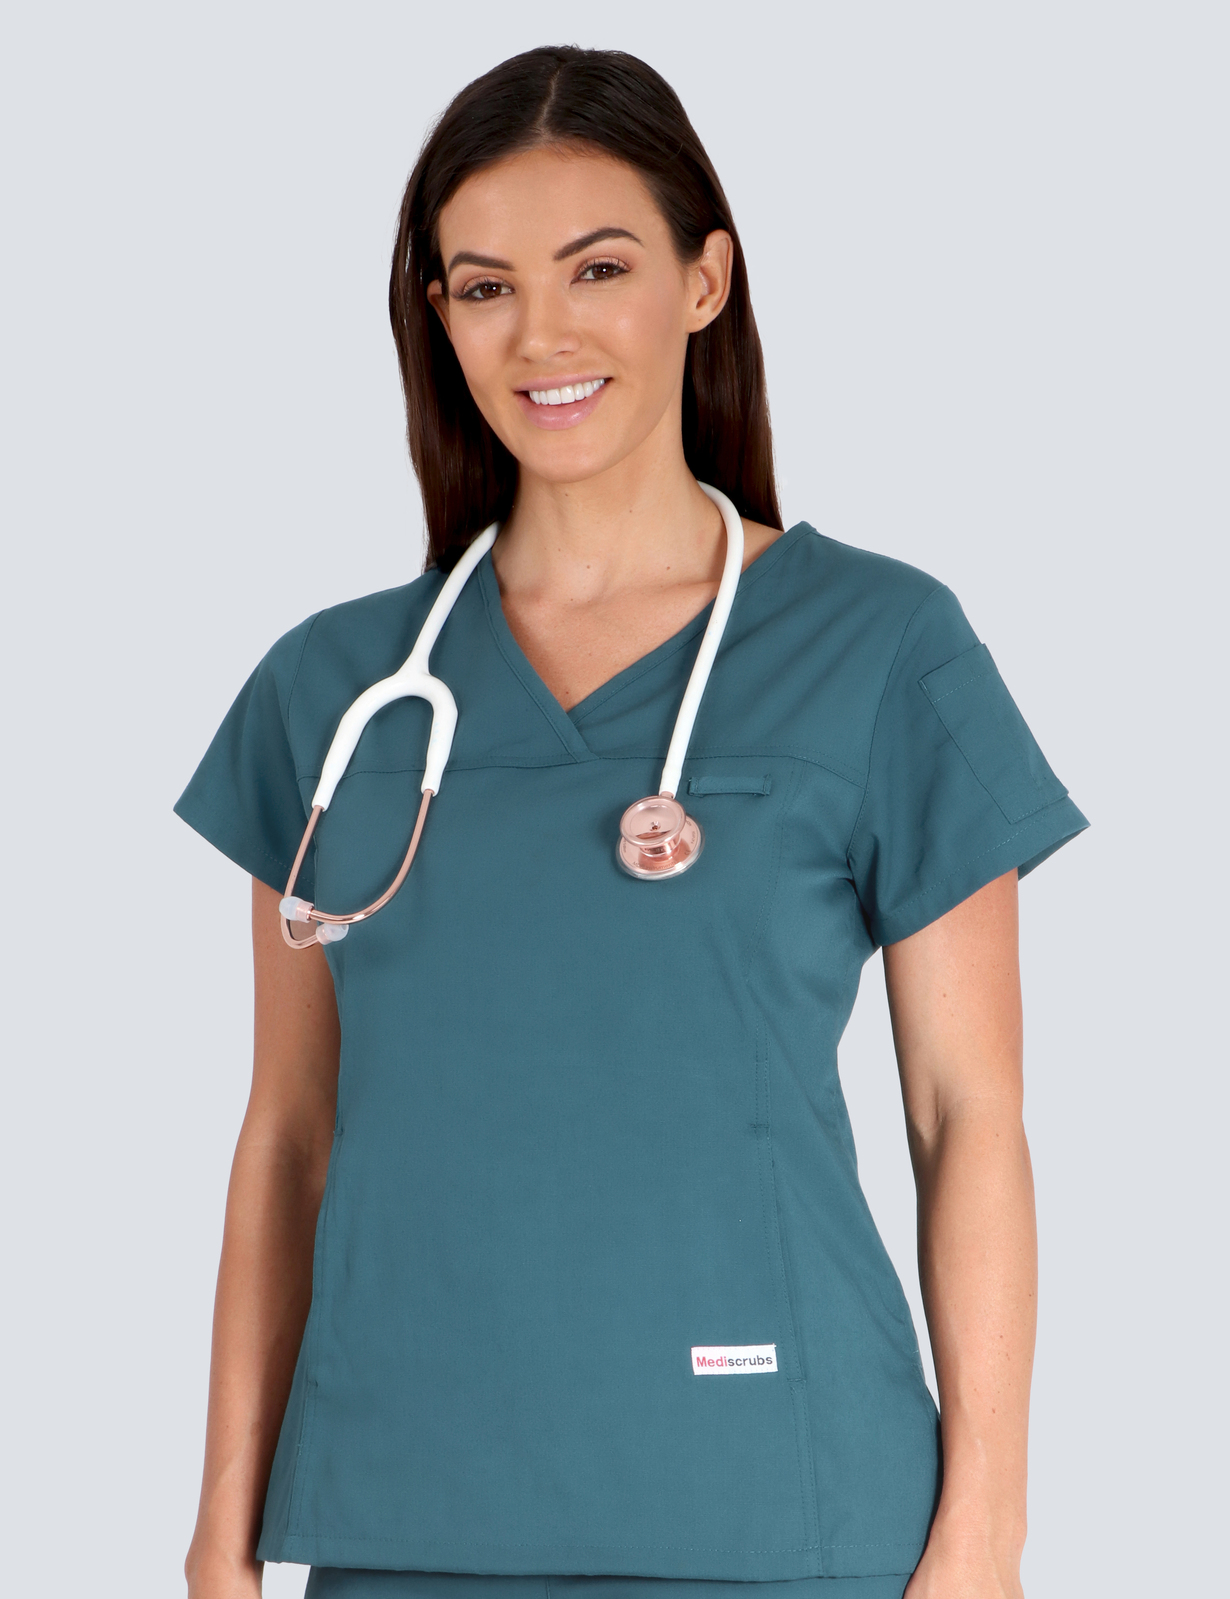 St. Vincent's - Medical Imaging Radiographer (Women's Fit Solid Scrub Top in Caribbean incl Logos)